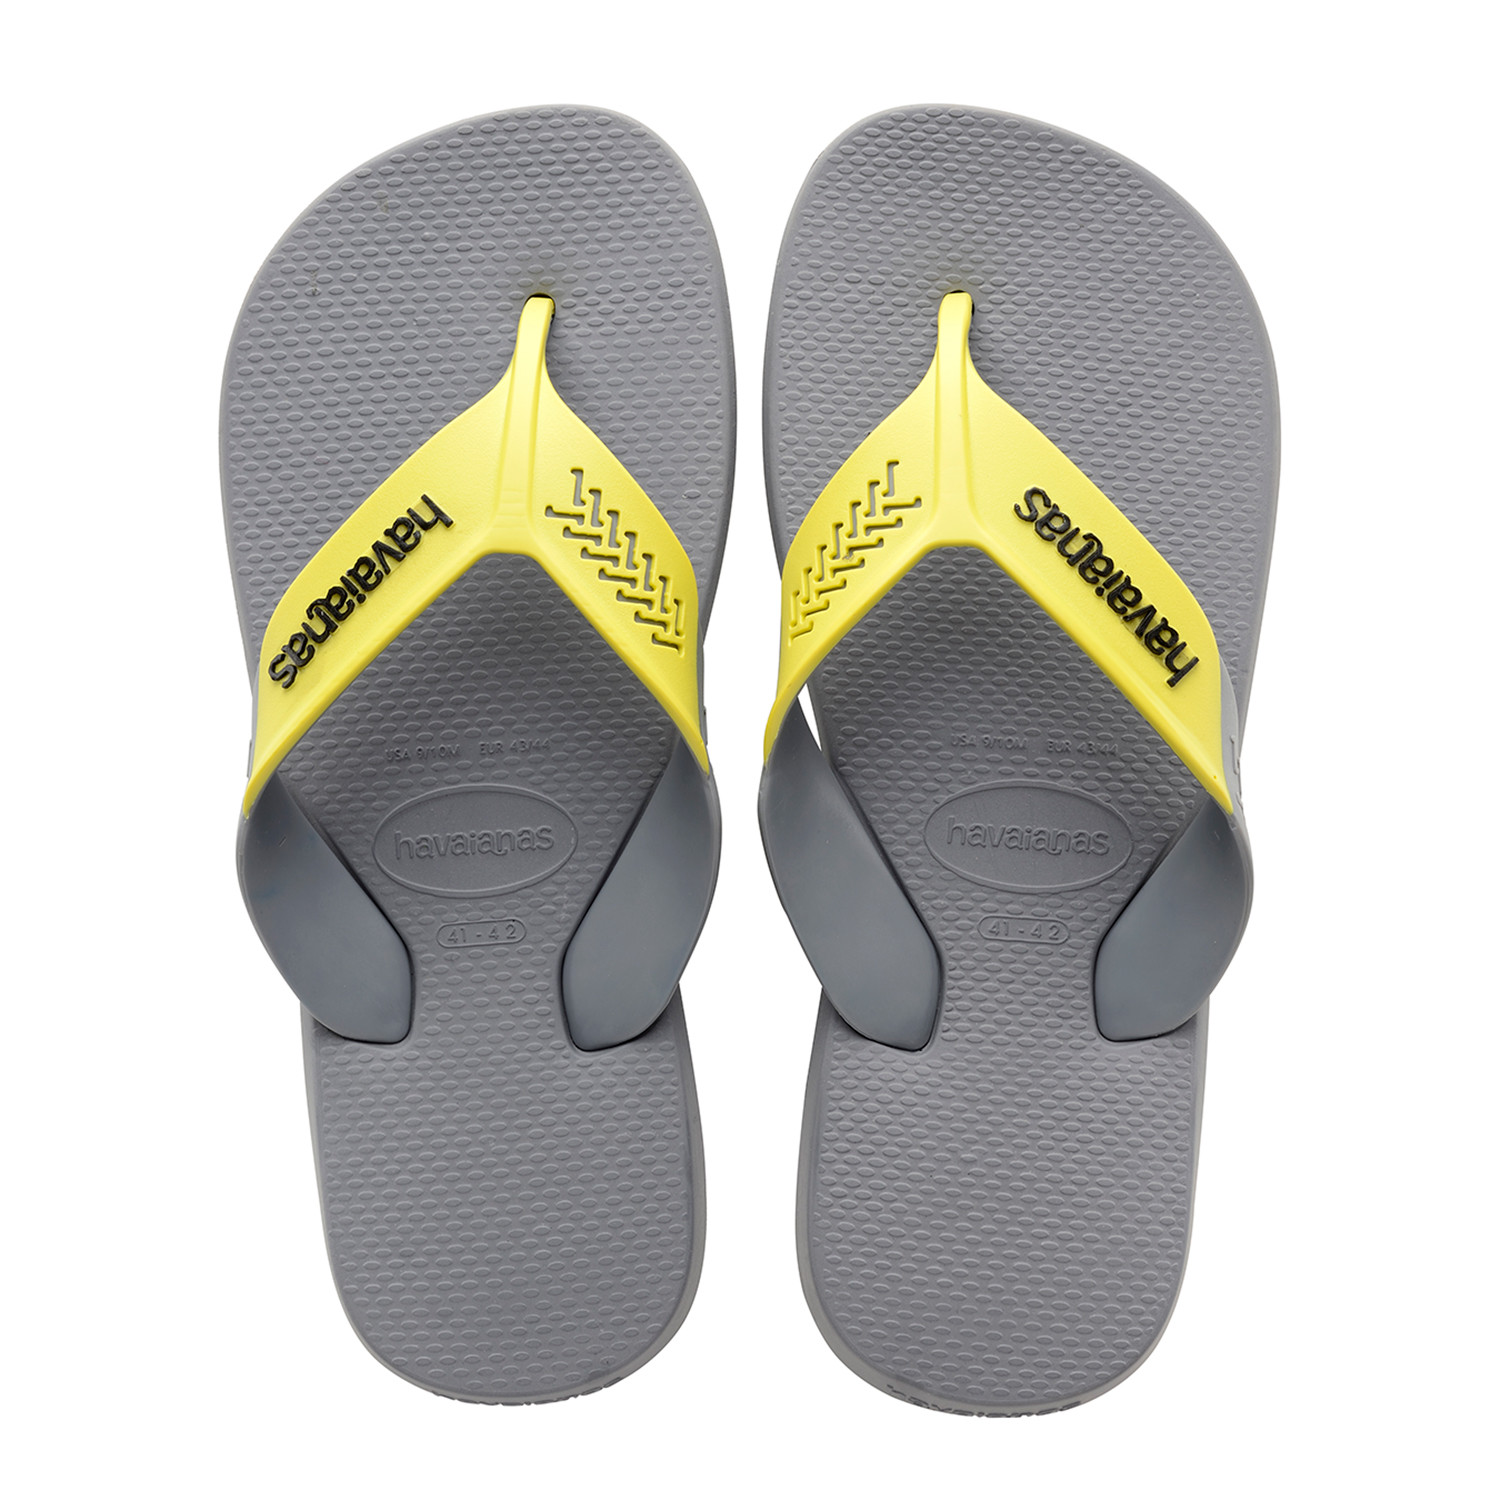 Dynamic Sandal // Steel Gray (US: 8) - Havaianas - Touch of Modern